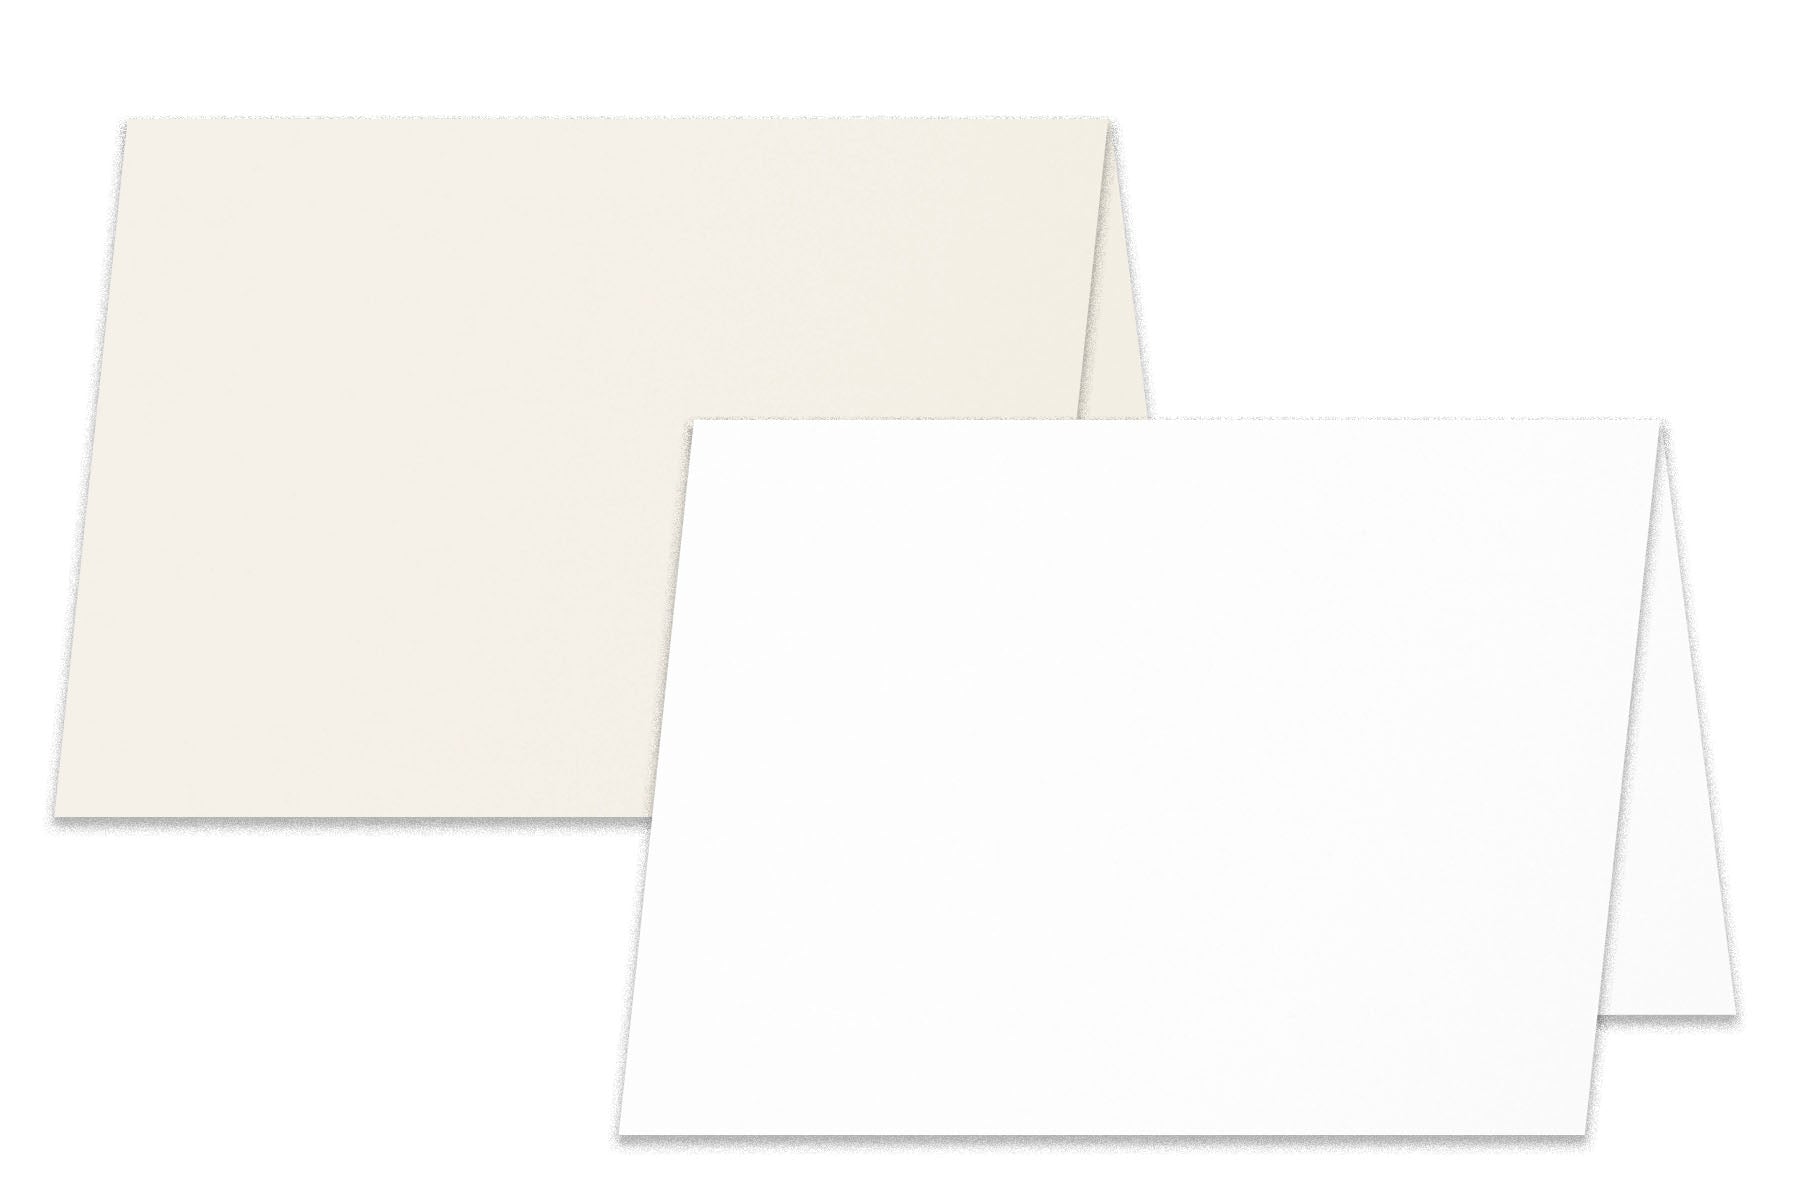 White Blank Greeting Fold Over Cards Uncoated, 4 1/2 x 6 Inches Cards - 40 Foldover Greeting Cards Cards and Envelopes